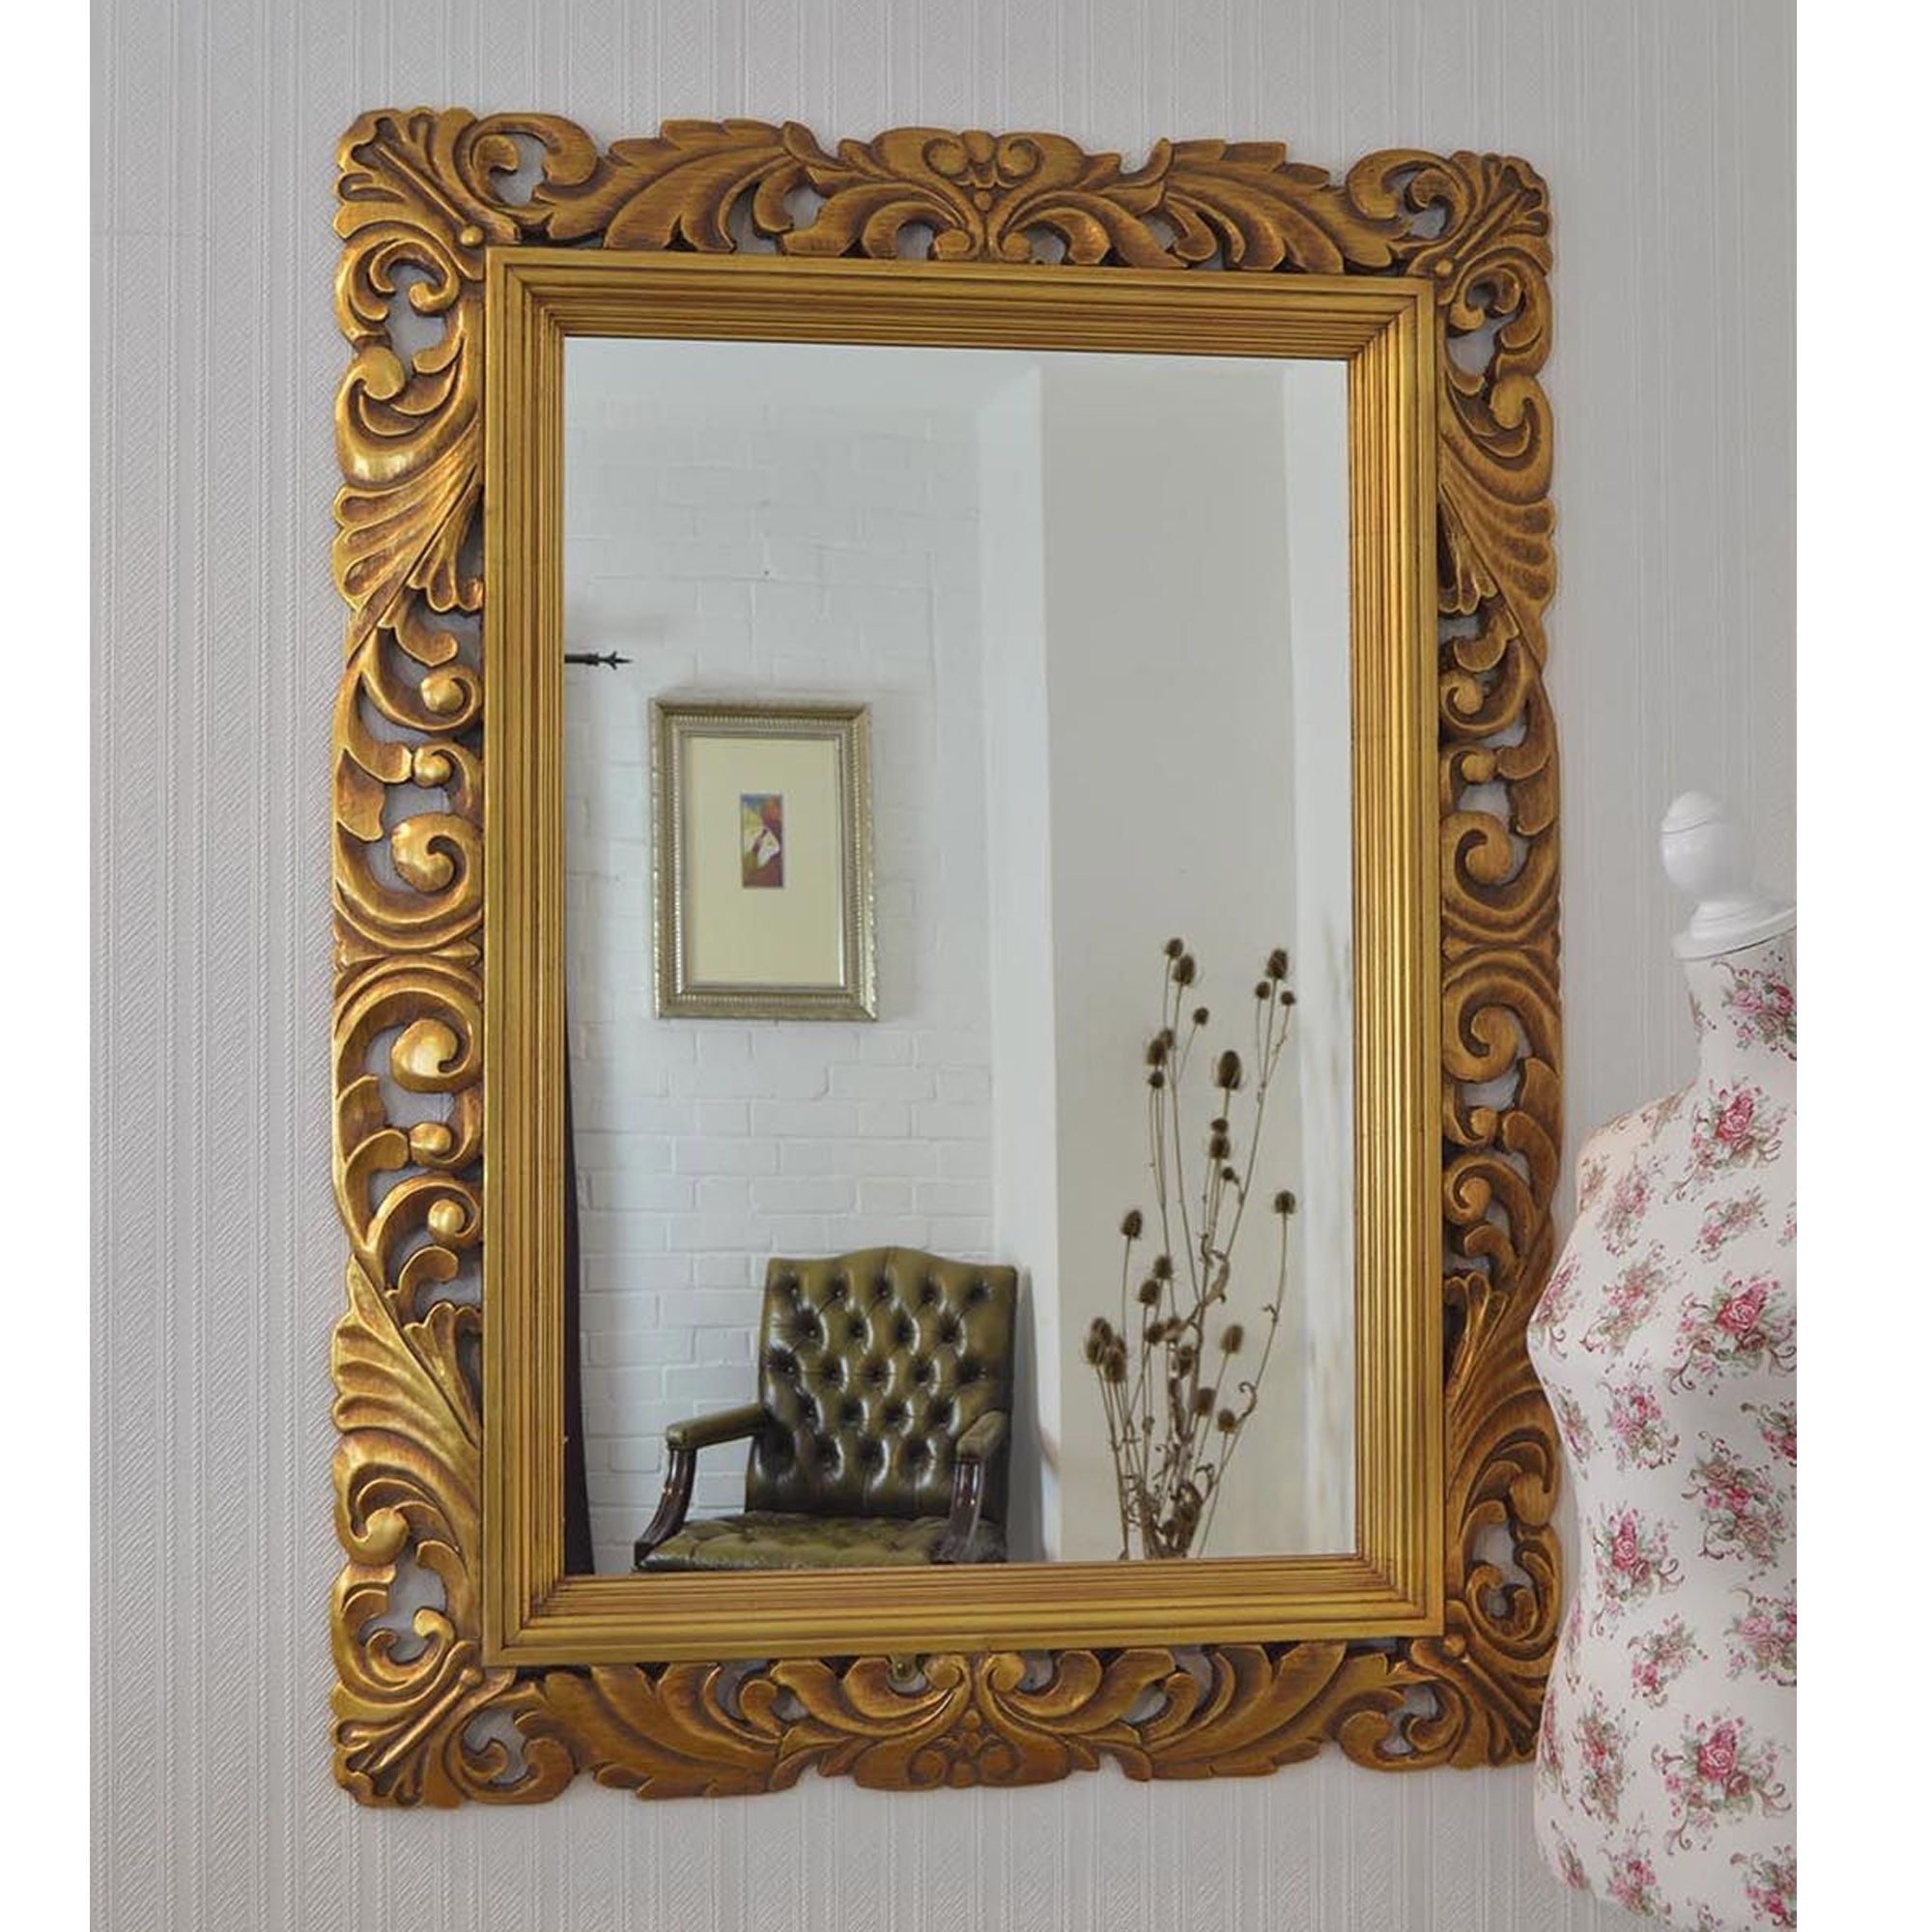 Ornate Framed Gold Antique French Style Wall Mirror – French Mirrors Pertaining To Antiqued Glass Wall Mirrors (View 4 of 15)